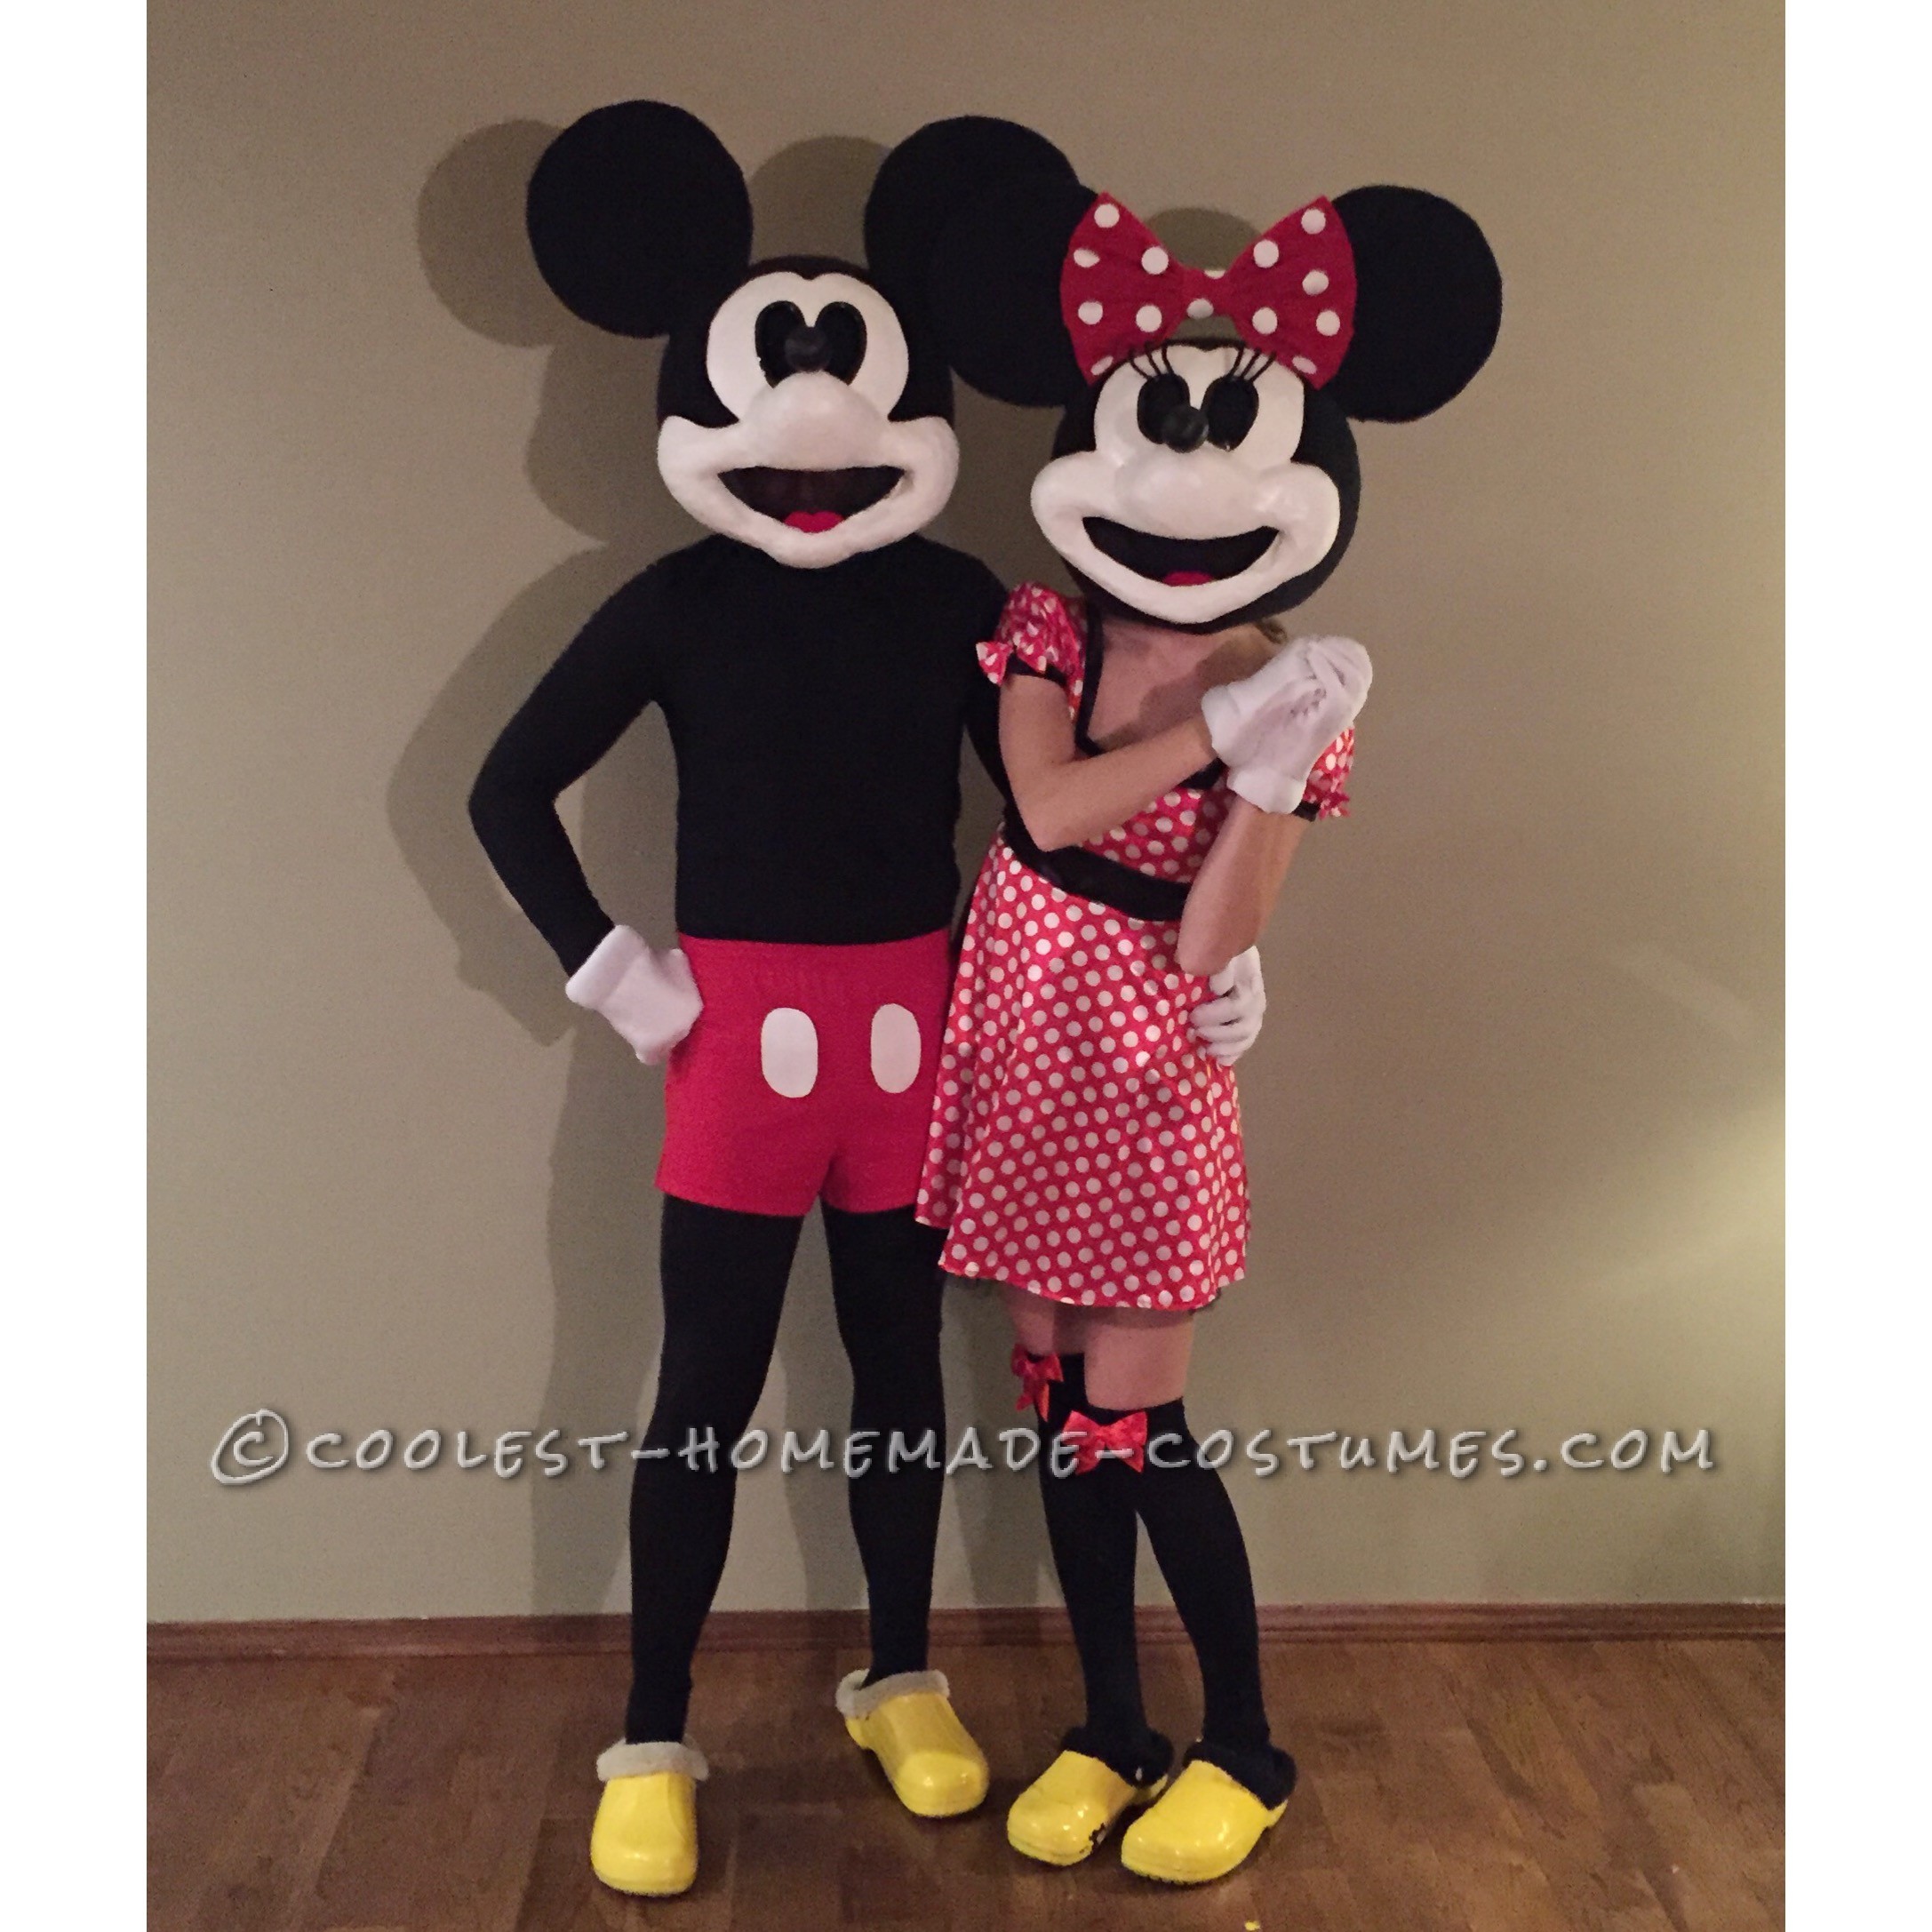 Vintage Mickey and Minnie Mouse Costume